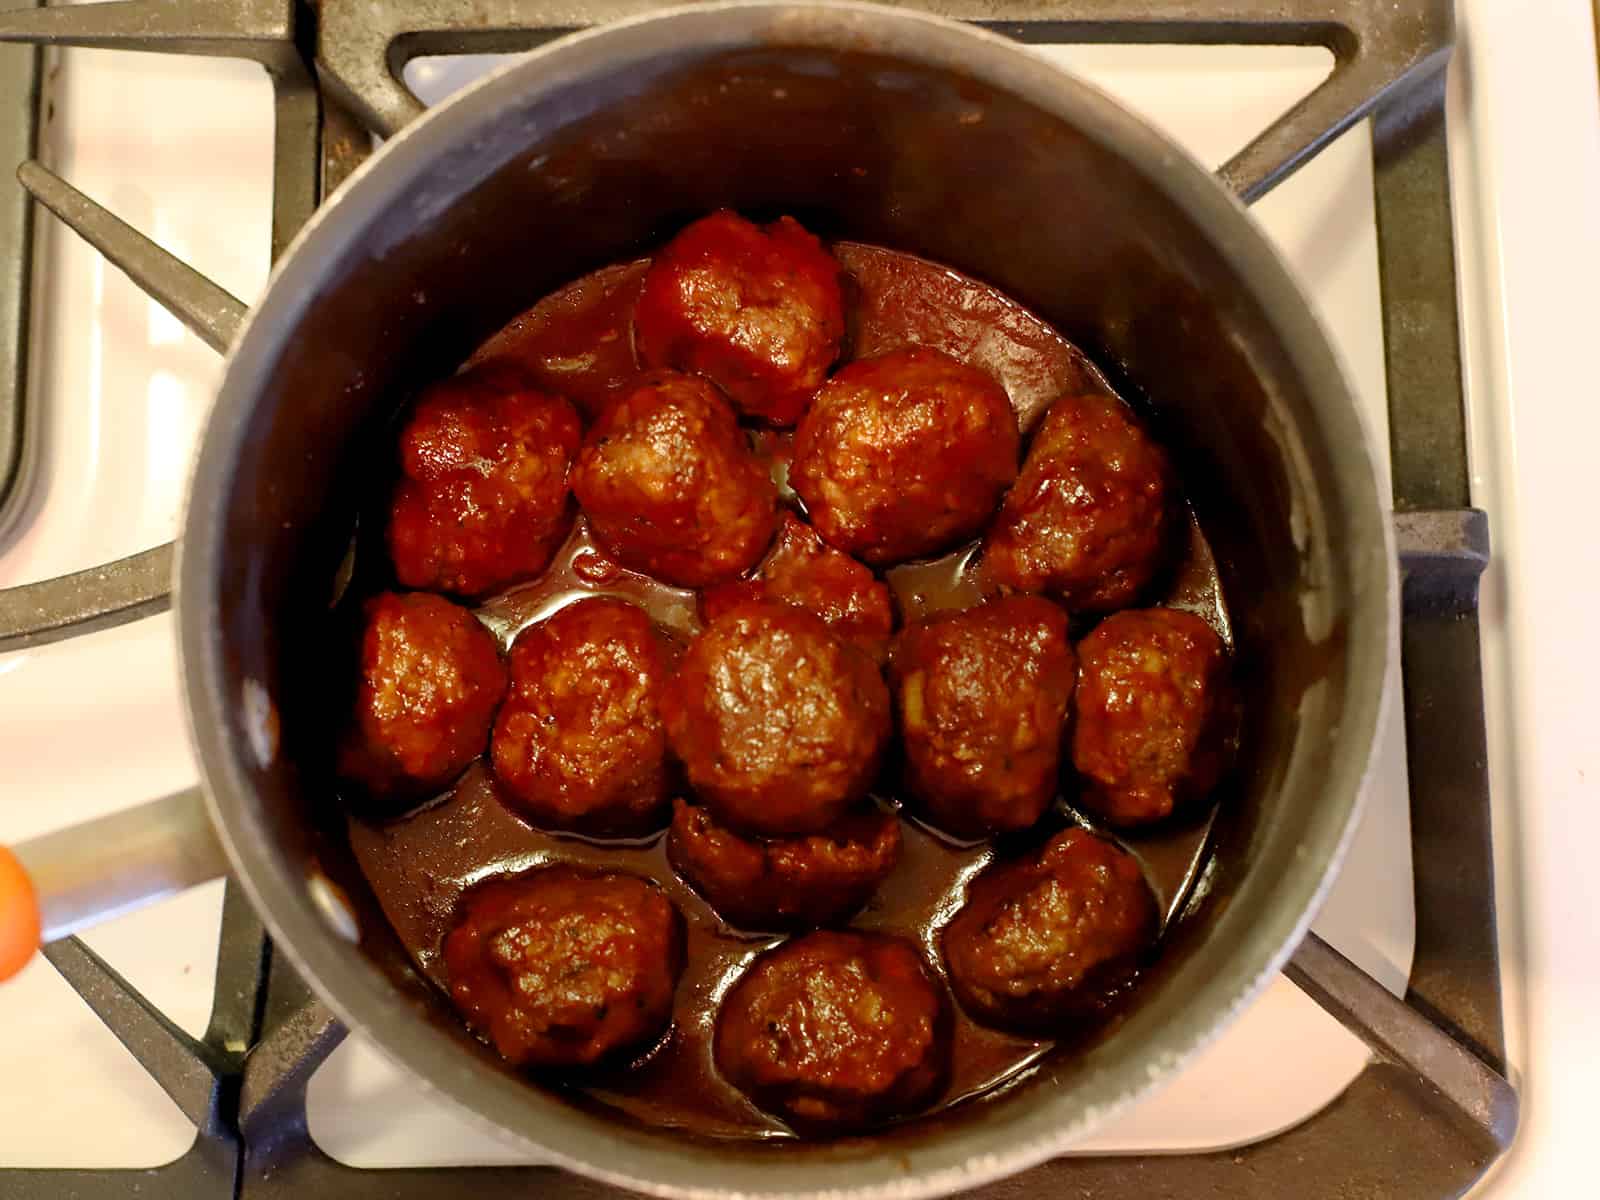 A pot full of cooked meatballs and sauce